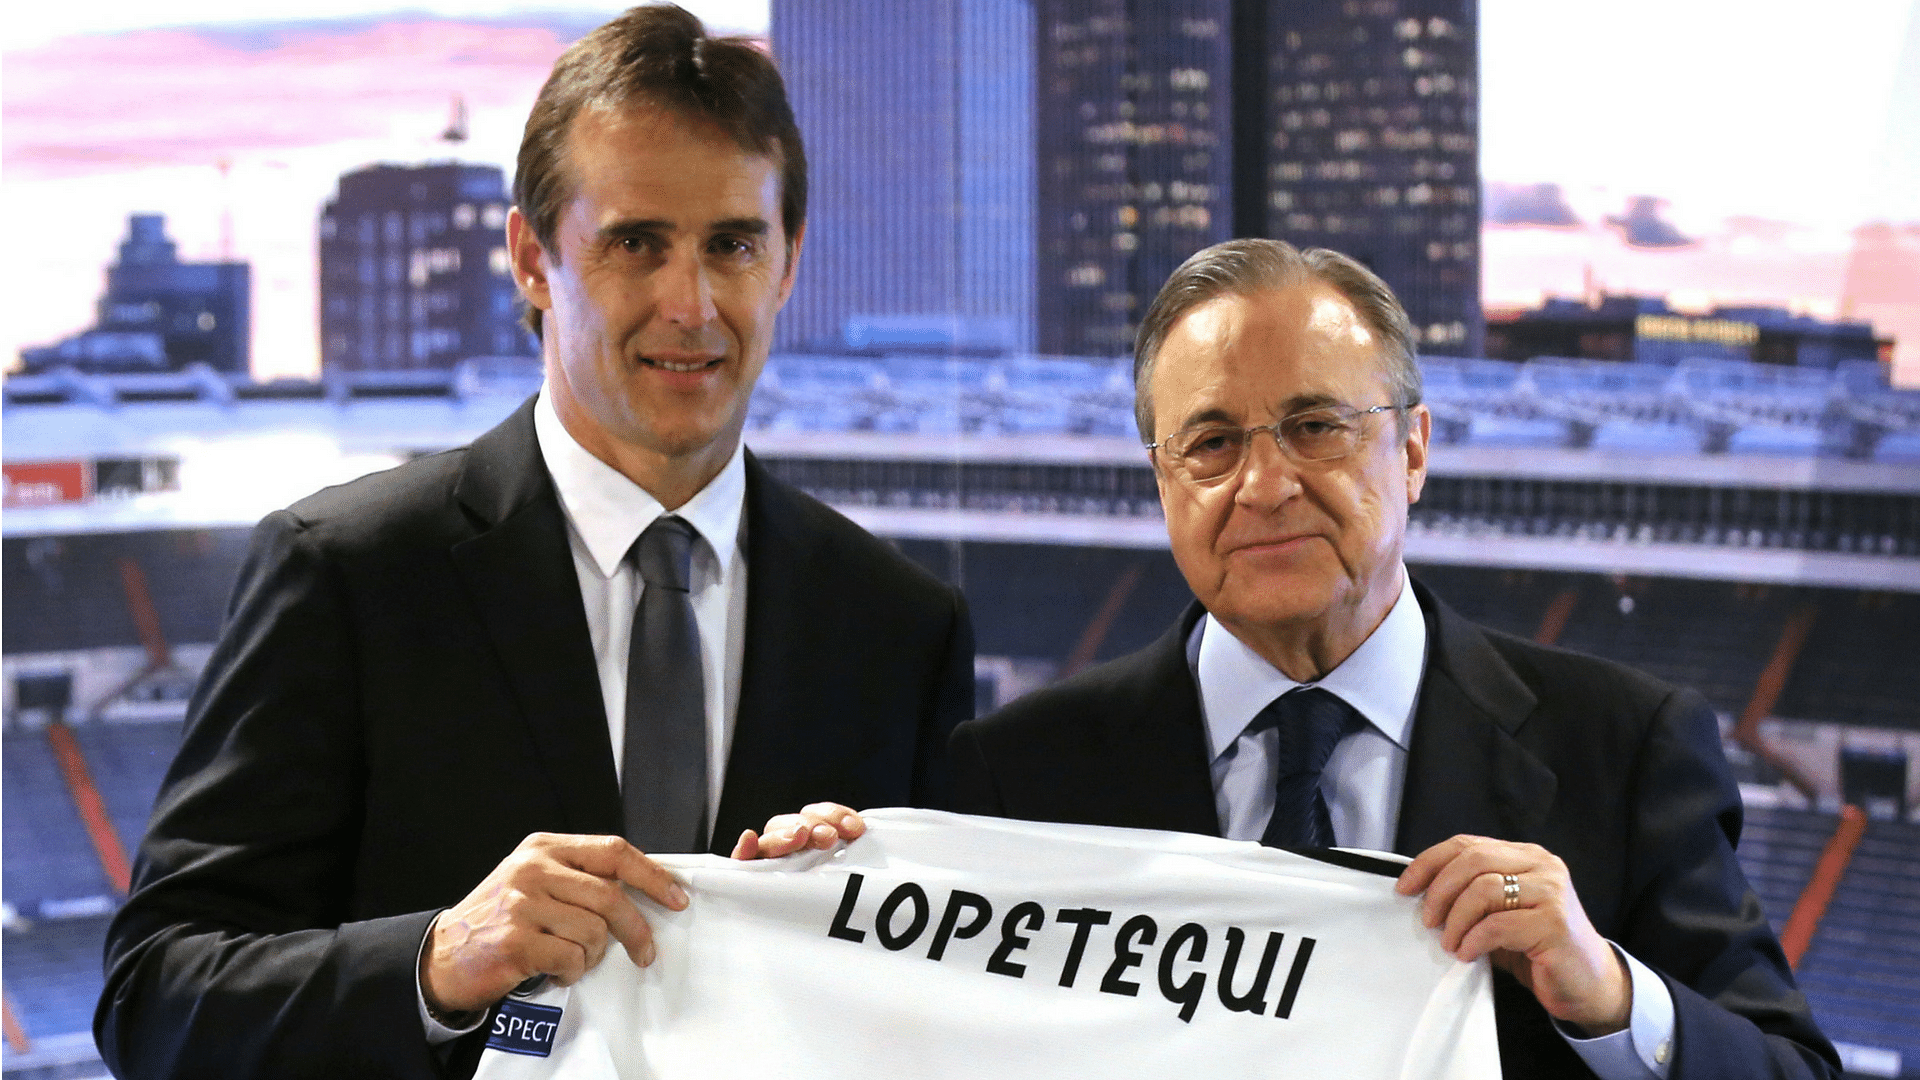 New coach Julen Lopetegui is presented a club shirt by Real Madrid President Florentino Perez.